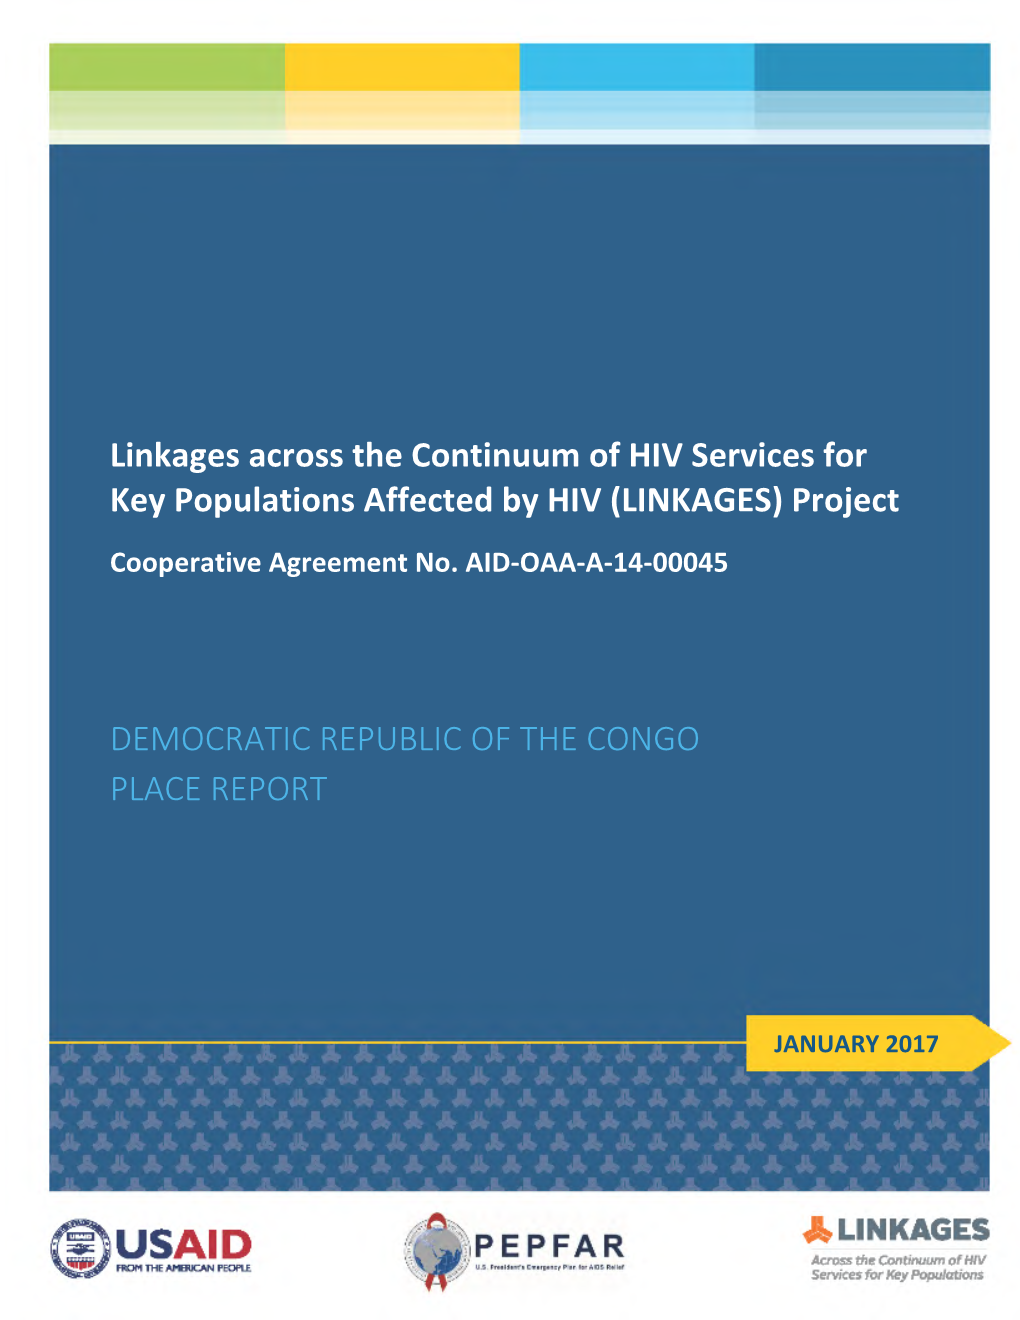 Linkages Democratic Republic of the Congo PLACE Report